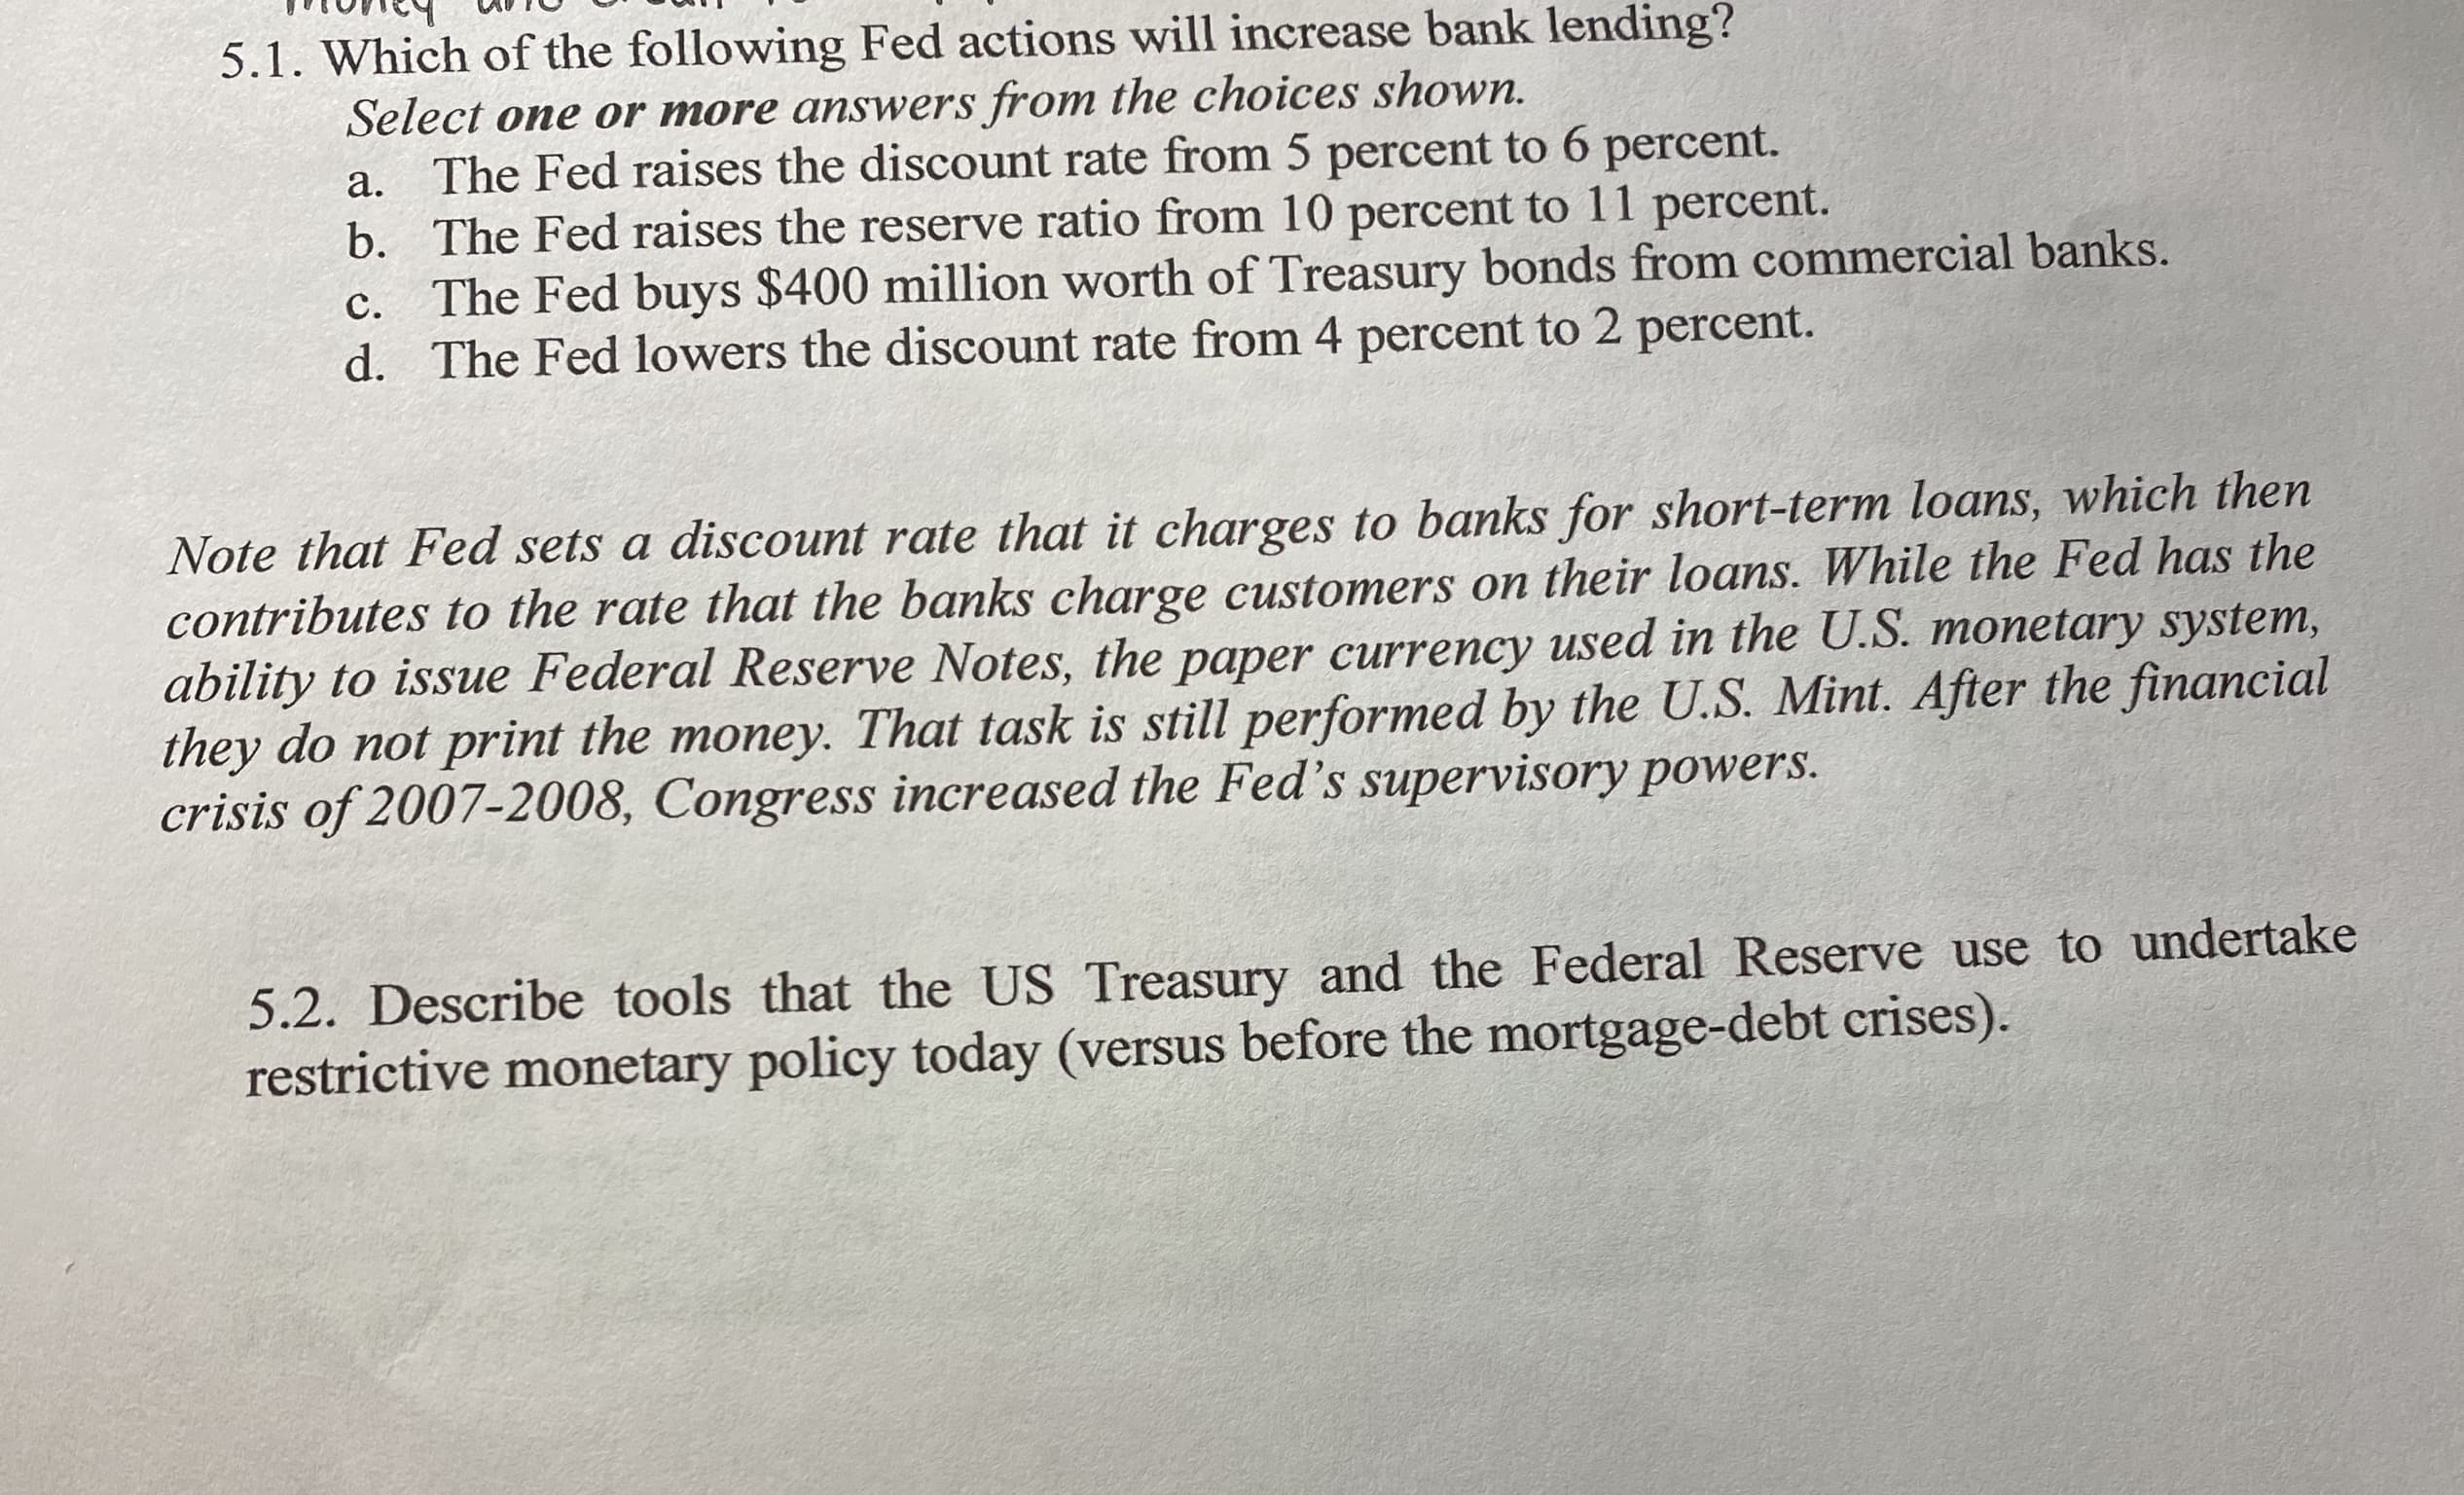 5.1. Which of the following Fed actions will in
Select one or more answers from the choices shown.
a. The Fed raises the discount rate from 5 percent to 6 percent.
b. The Fed raises the reserve ratio from 10 percent to 11 percent.
c. The Fed buys $400 million worth of Treasury bonds from commercial banks.
d. The Fed lowers the discount rate from 4 percent to 2 percent.
с.
